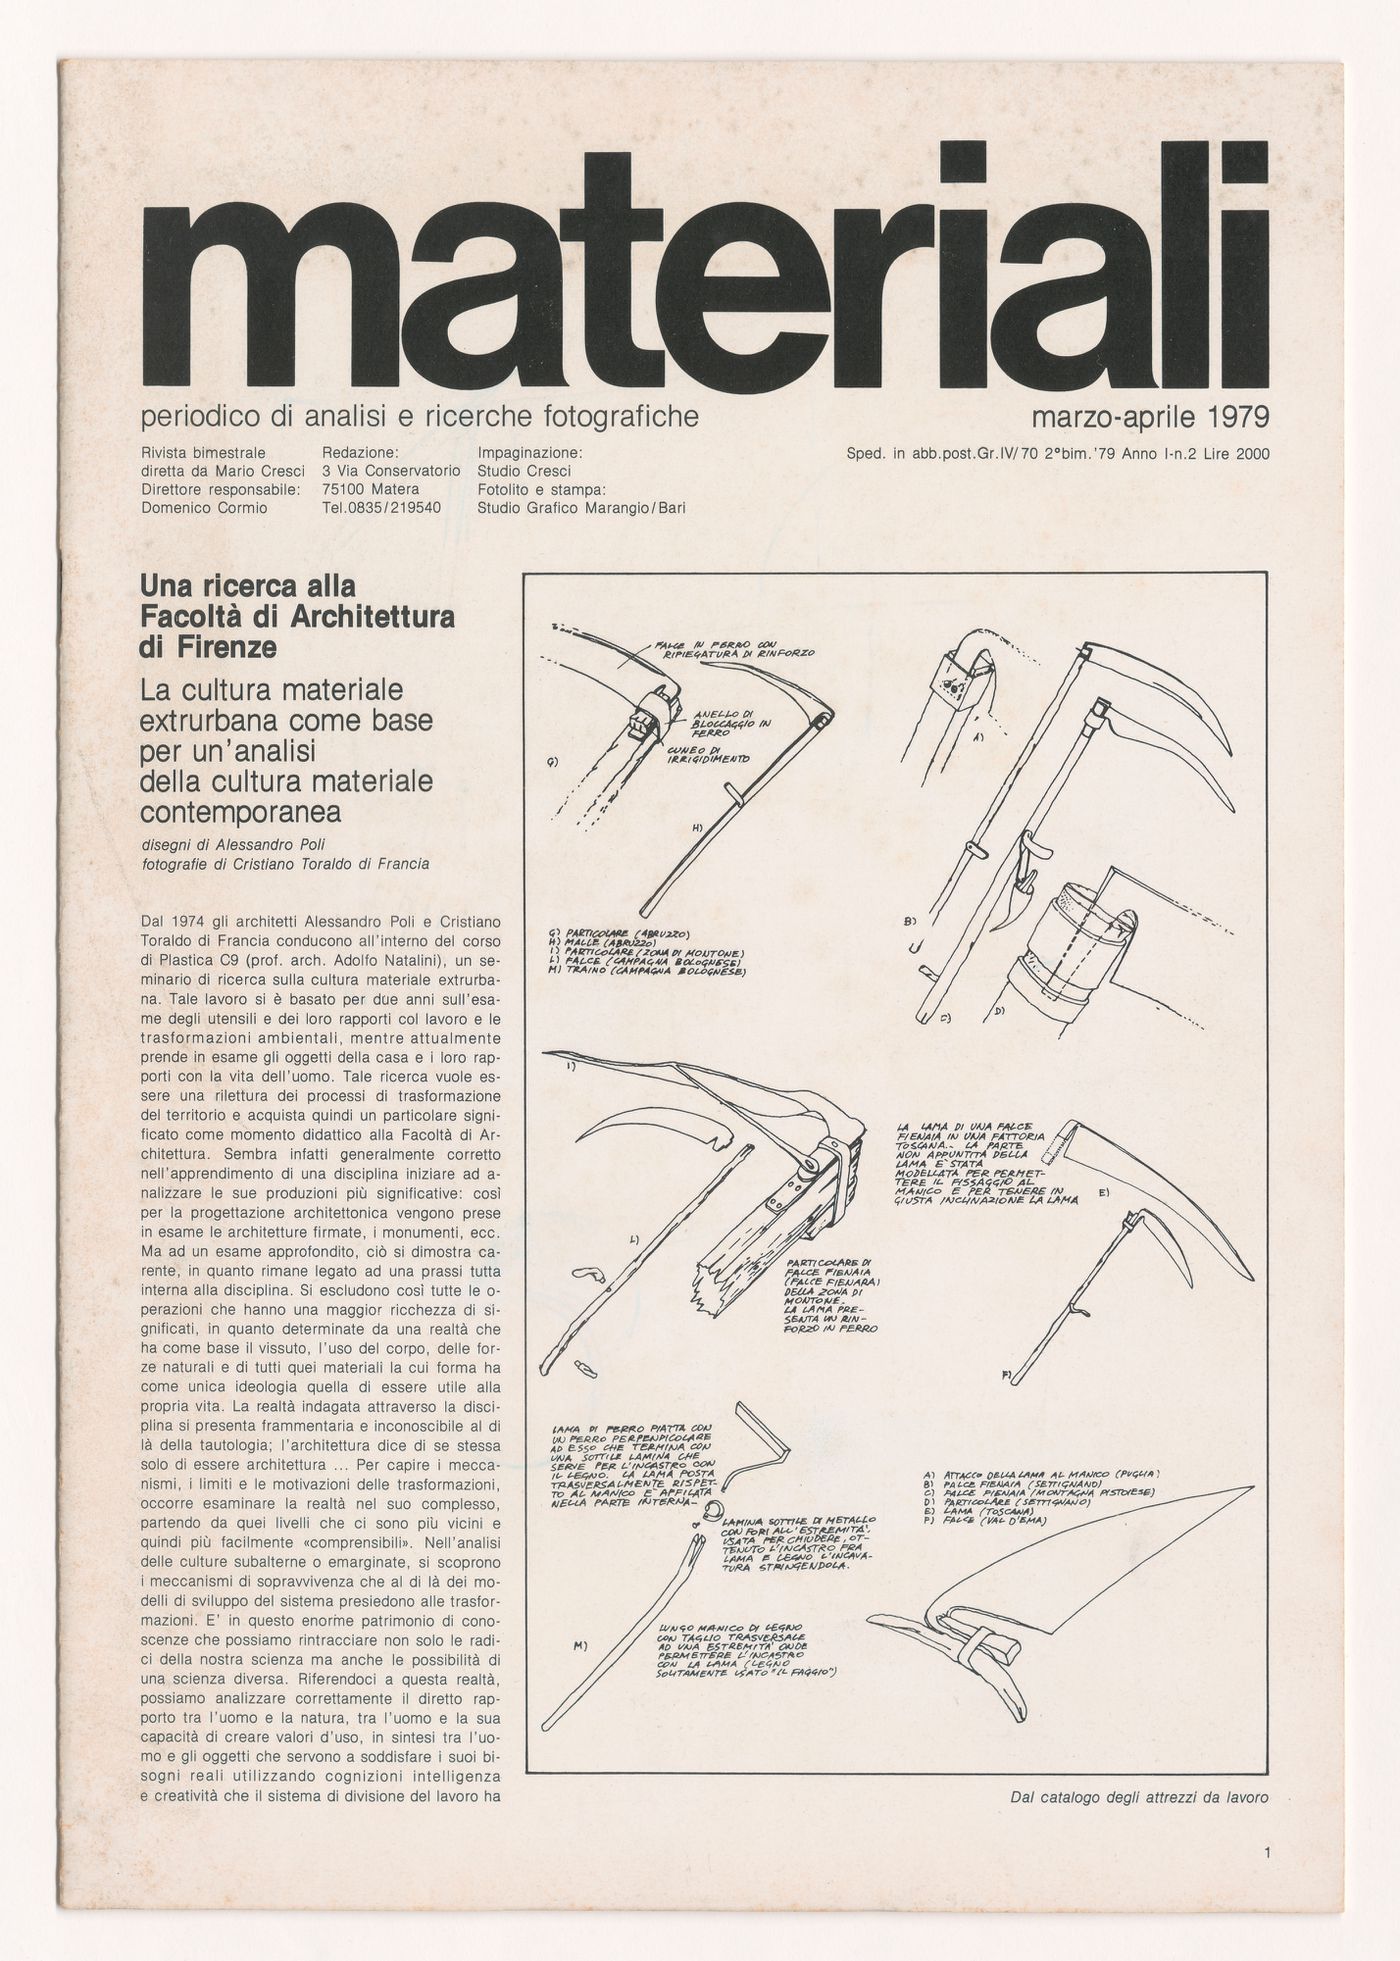 Issue of "Materiali" magazine featuring an extensive article by Alessandro Poli on material culture and Zeno, his home and his tools (from the project file Zeno, une cultura autosufficiente [Zeno, a self-sufficient culture])